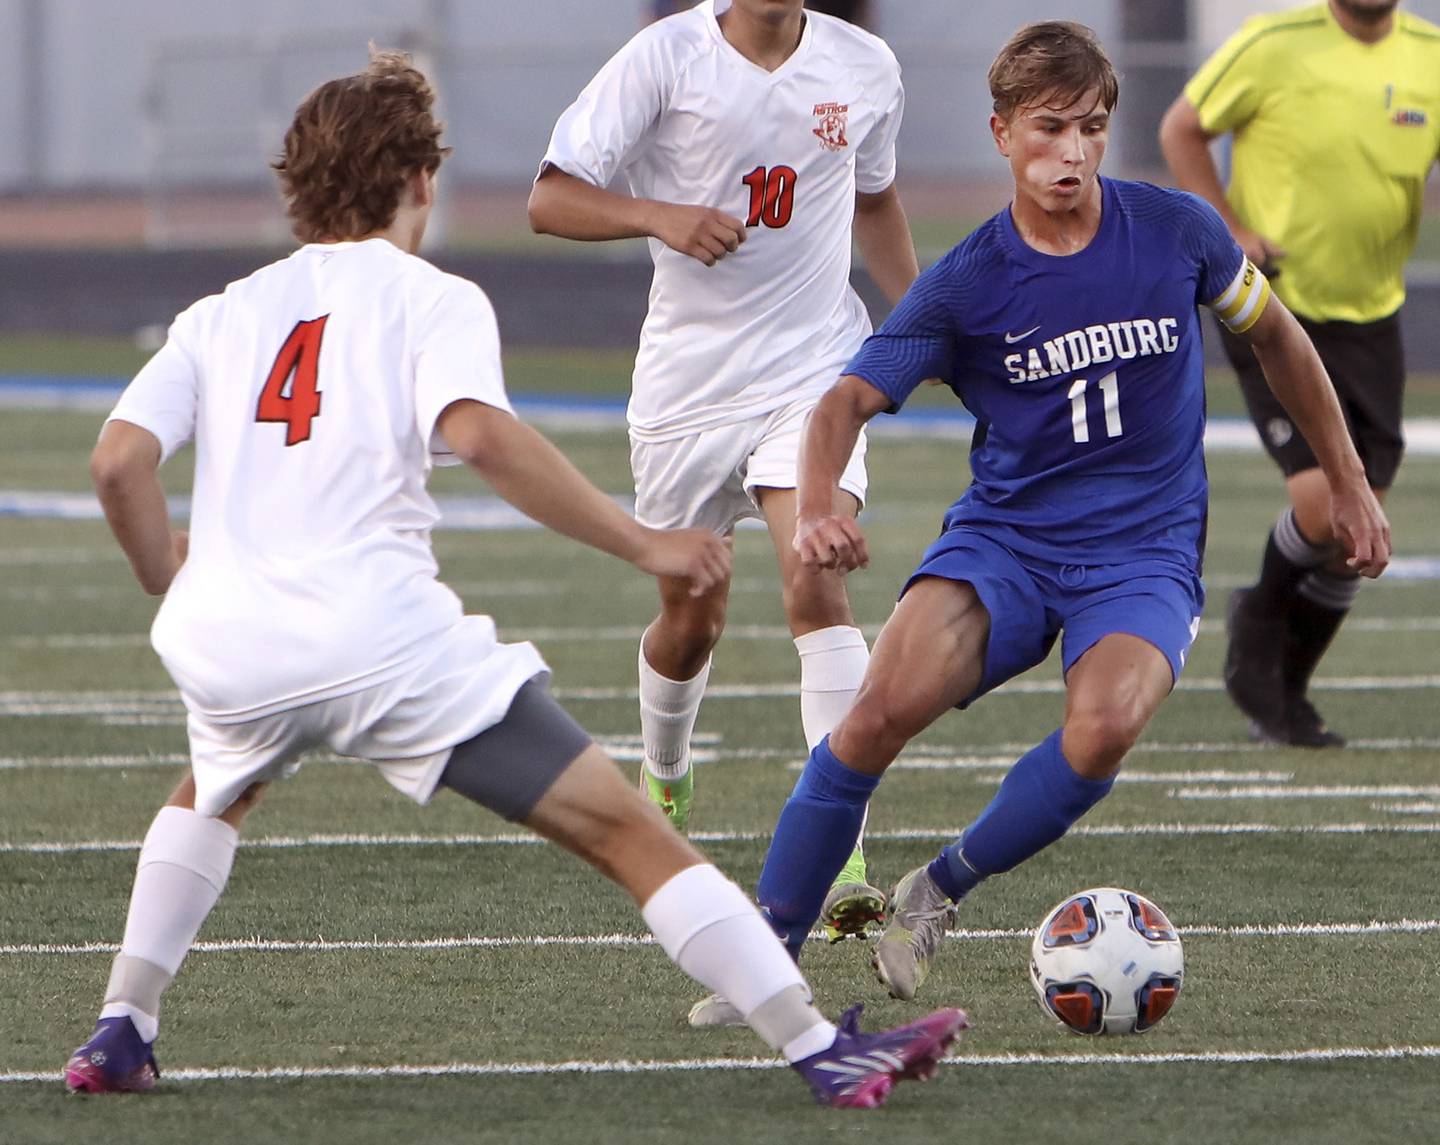 Sandburg's Sebastian Burzynski (11) works the ball down the field as Shepard's Ryan Plowman defends during a nonconference game in Orland Park Sept. 7, 2022.